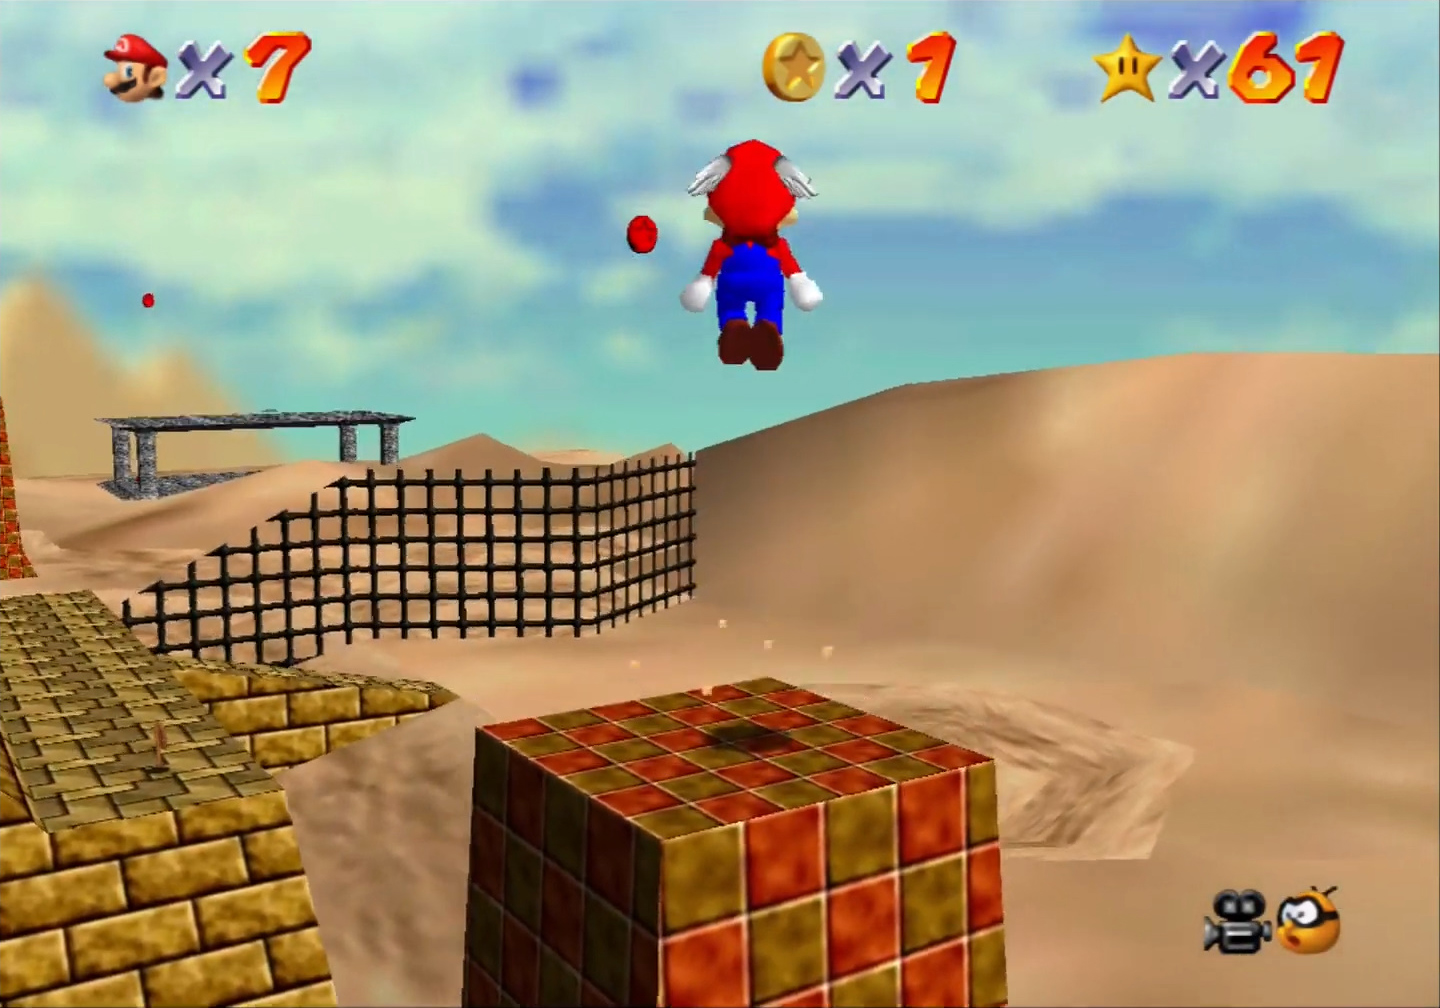 Super Mario 64 - 5. Free Flying for 8 Red Coins - Shifting Sand Land 5.